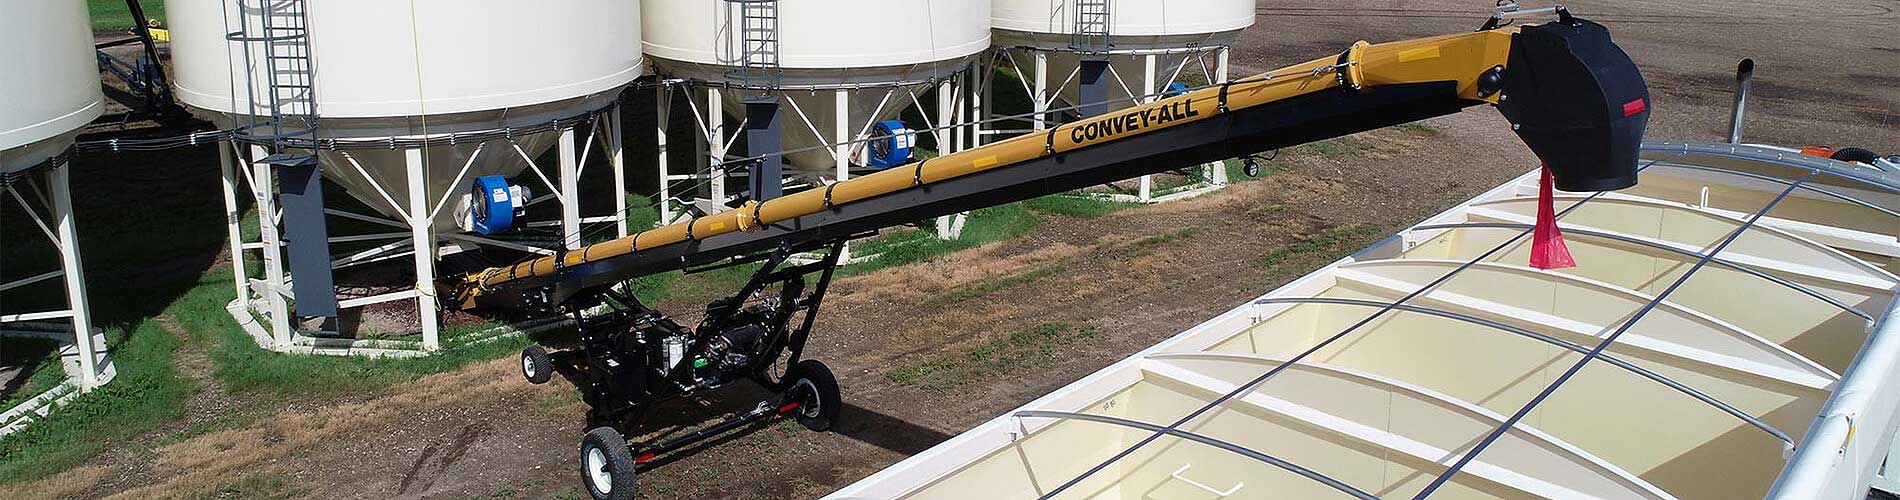 Convey-All® - Truck Load Conveyors